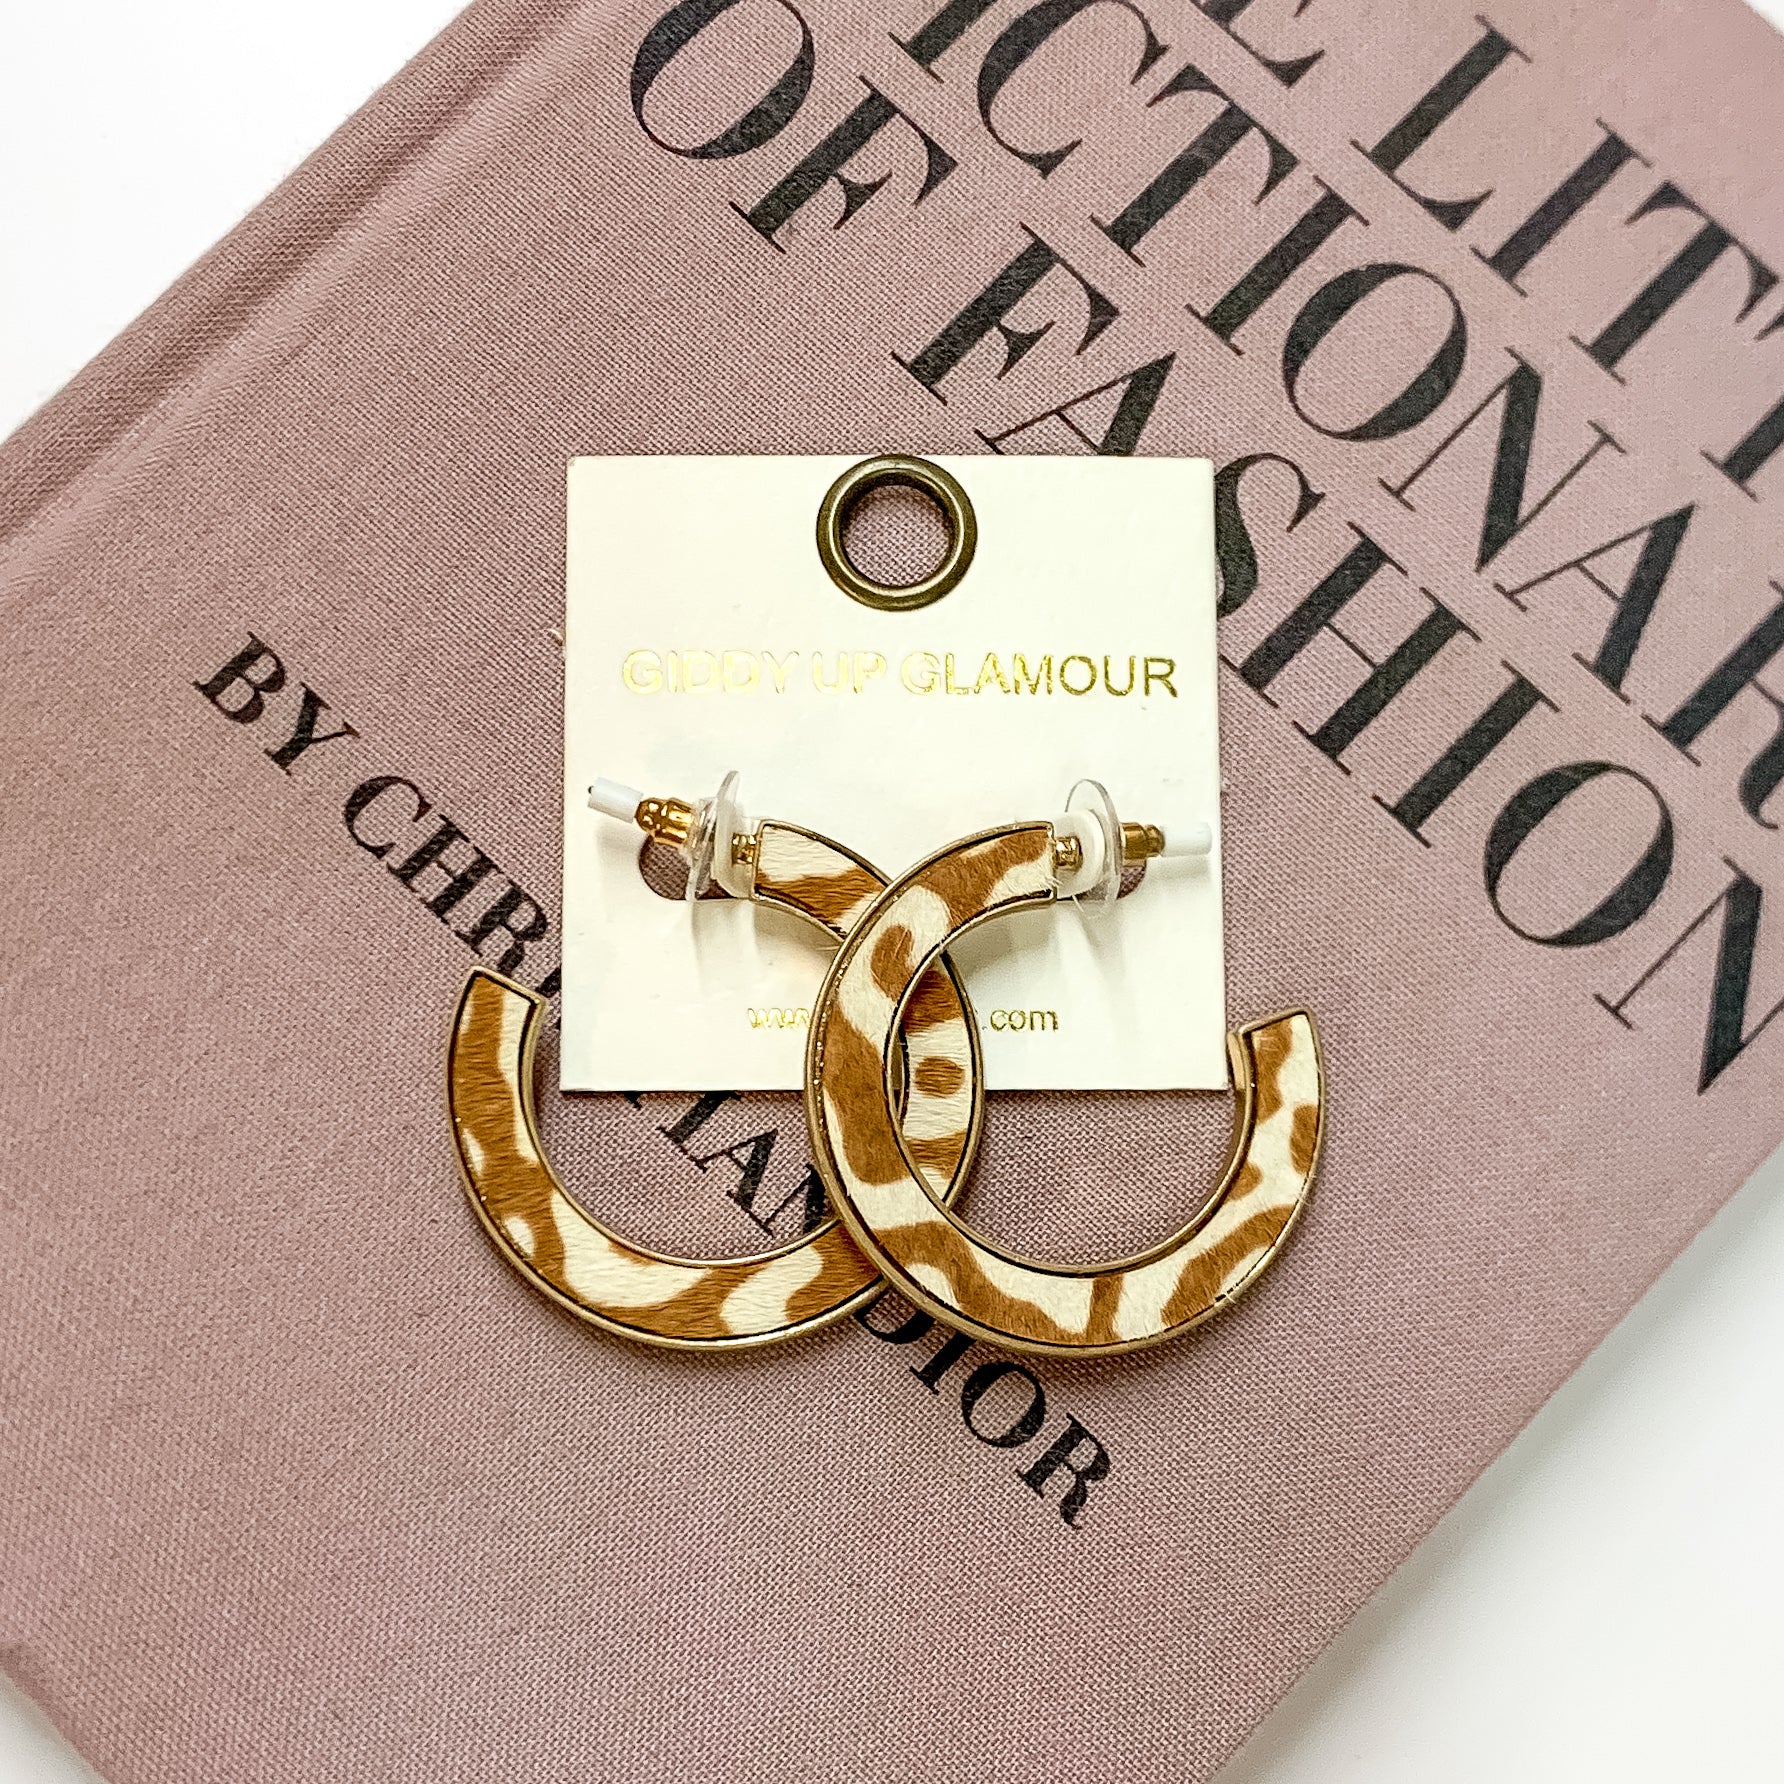 Animal Print Gold Hoops in White/Brown - Giddy Up Glamour Boutique